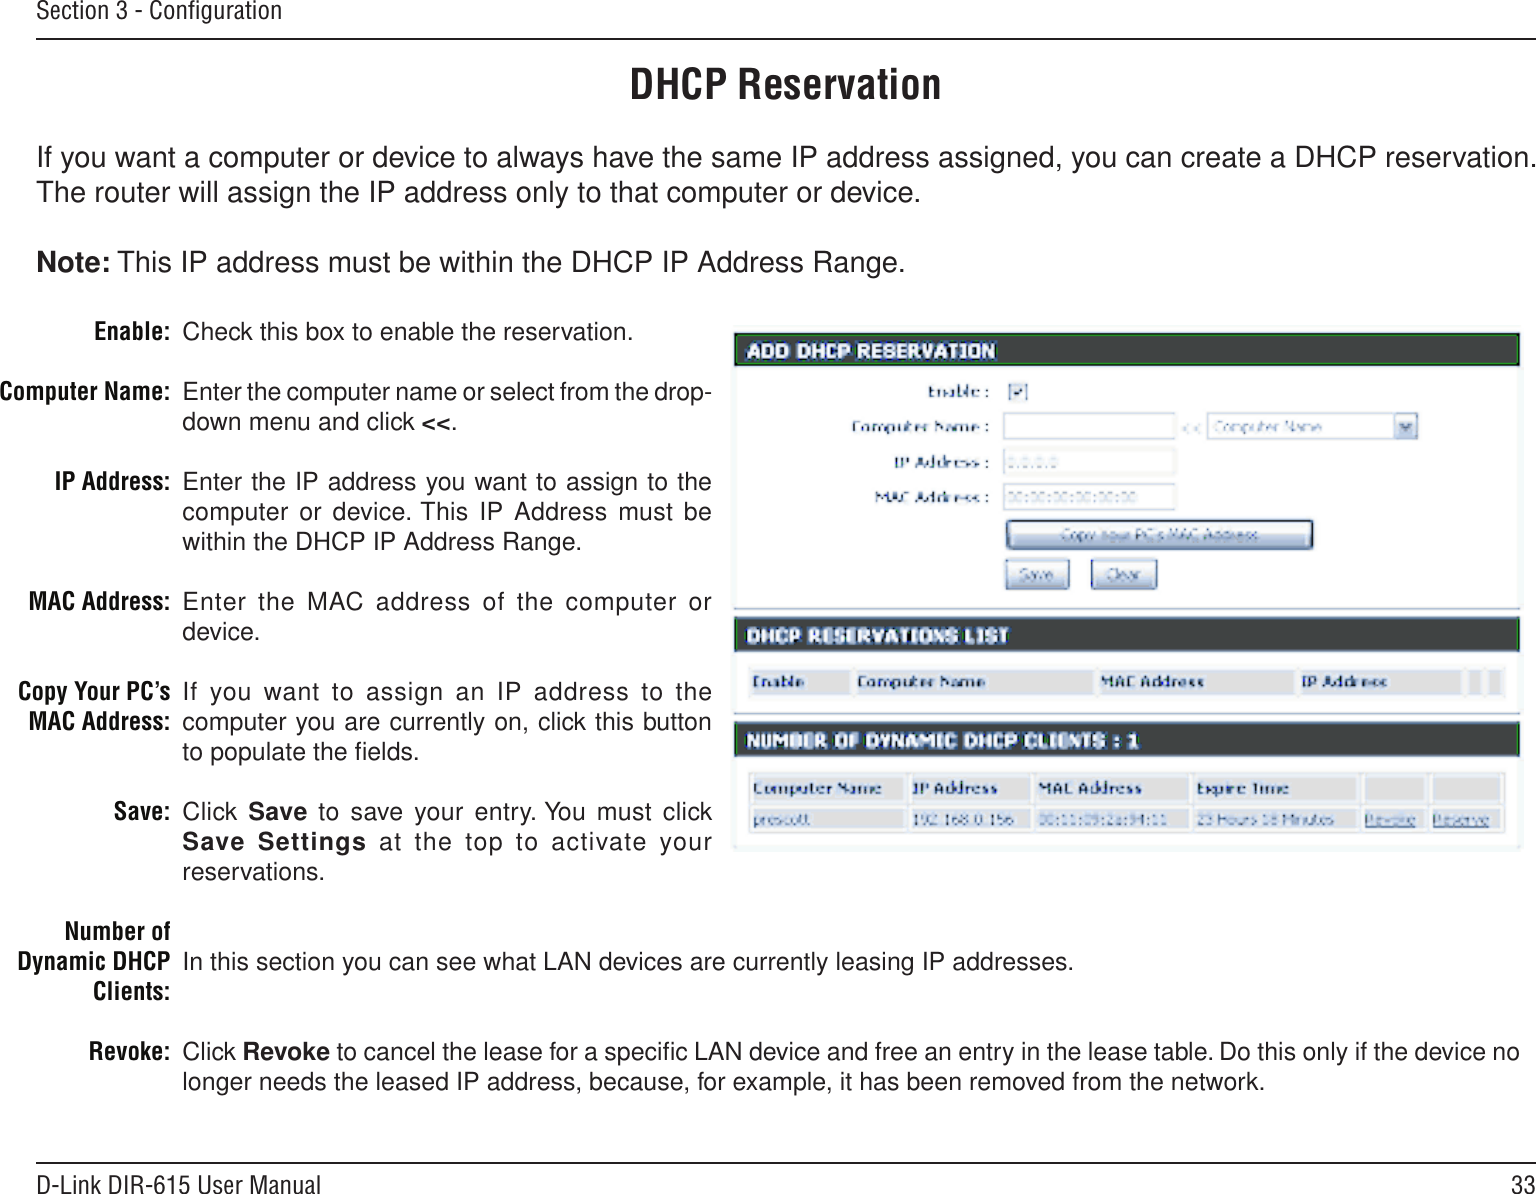 33D-Link DIR-615 User ManualSection 3 - ConﬁgurationDHCP ReservationIf you want a computer or device to always have the same IP address assigned, you can create a DHCP reservation. The router will assign the IP address only to that computer or device. Note: This IP address must be within the DHCP IP Address Range.Check this box to enable the reservation.Enter the computer name or select from the drop-down menu and click &lt;&lt;.Enter the IP address you want to assign to the computer or device. This  IP Address must be within the DHCP IP Address Range.Enter the MAC address of the computer or device.If you  want to assign an IP address to the computer you are currently on, click this button to populate the ﬁelds. Click  Save  to save your  entry. You  must  click Save Settings  at  the  top  to  activate your reservations. In this section you can see what LAN devices are currently leasing IP addresses.Click Revoke to cancel the lease for a speciﬁc LAN device and free an entry in the lease table. Do this only if the device no longer needs the leased IP address, because, for example, it has been removed from the network.Enable:Computer Name:IP Address:MAC Address:Copy Your PC’s MAC Address:Save:Number of Dynamic DHCP Clients:Revoke: